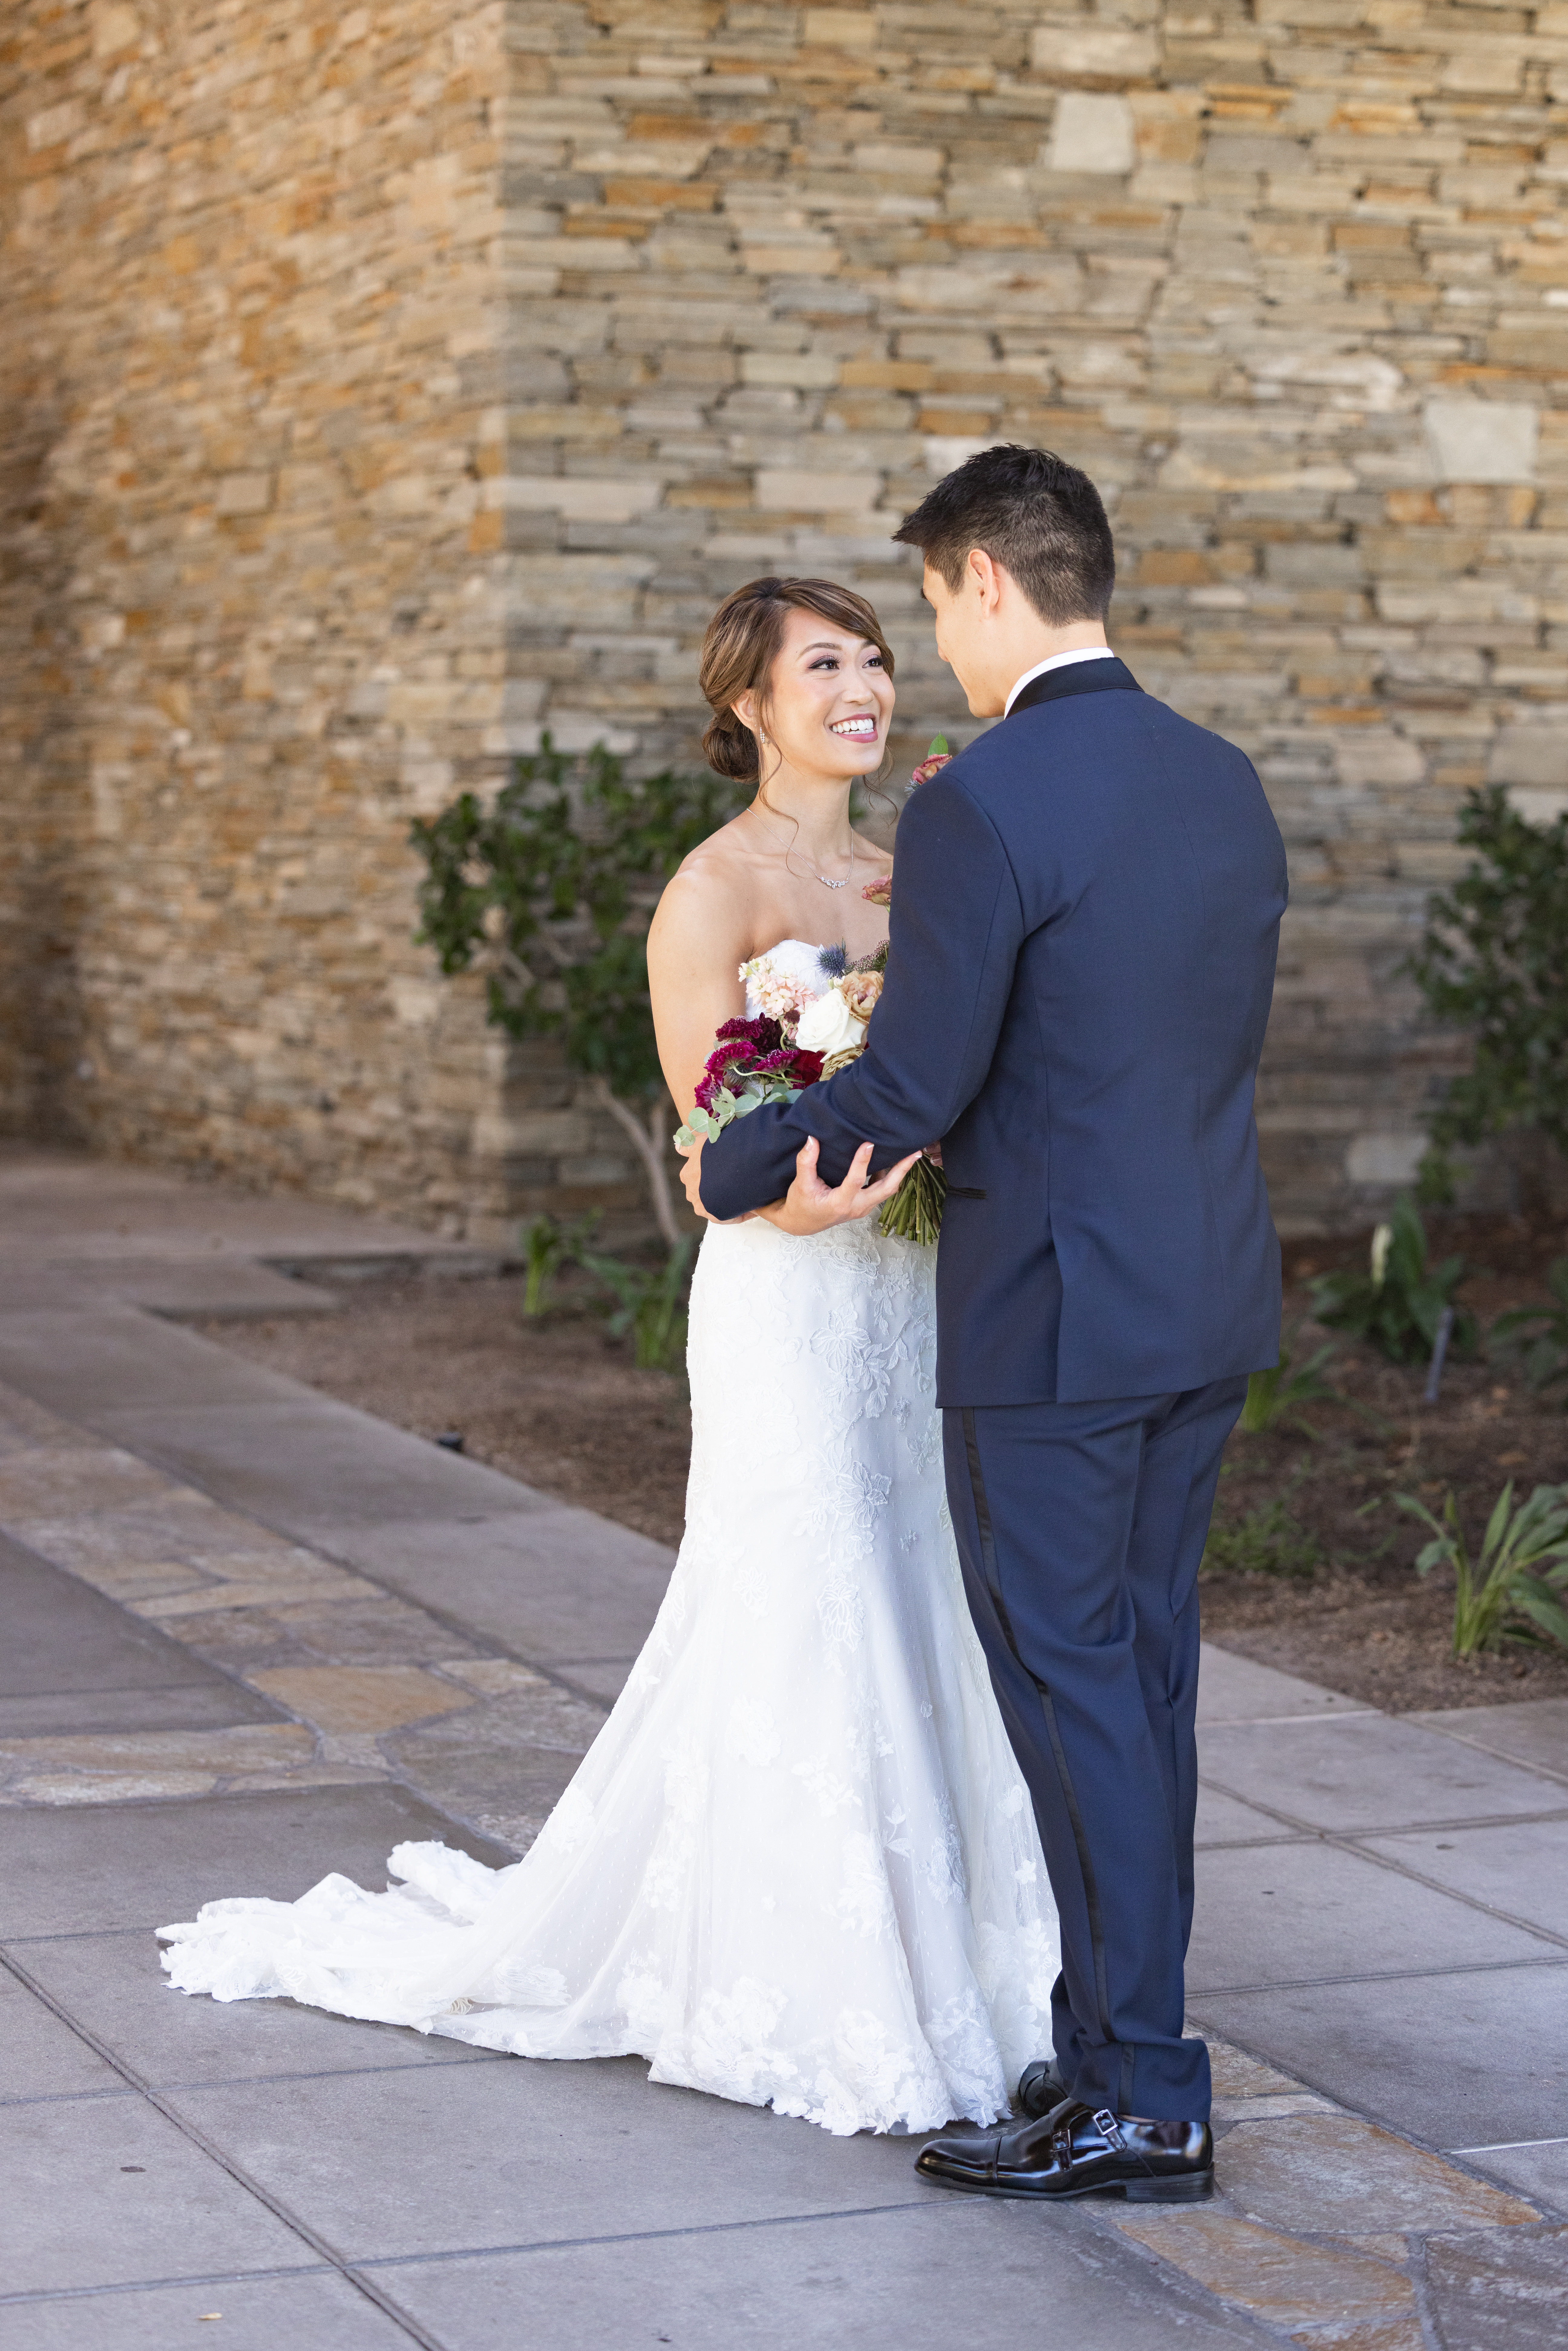 first look with bride in strapless wedding dress and jewel toned bridal bouquet and groom in navy tuxedo suit with black lapels, grey vest and maroon tie